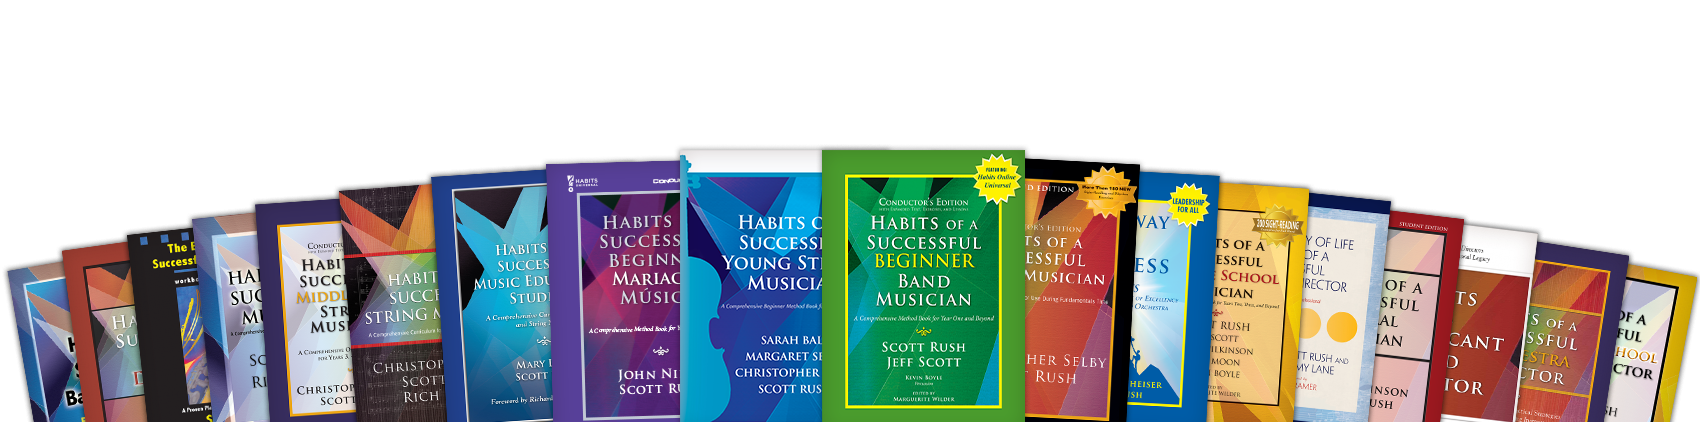 Image of all Habits books